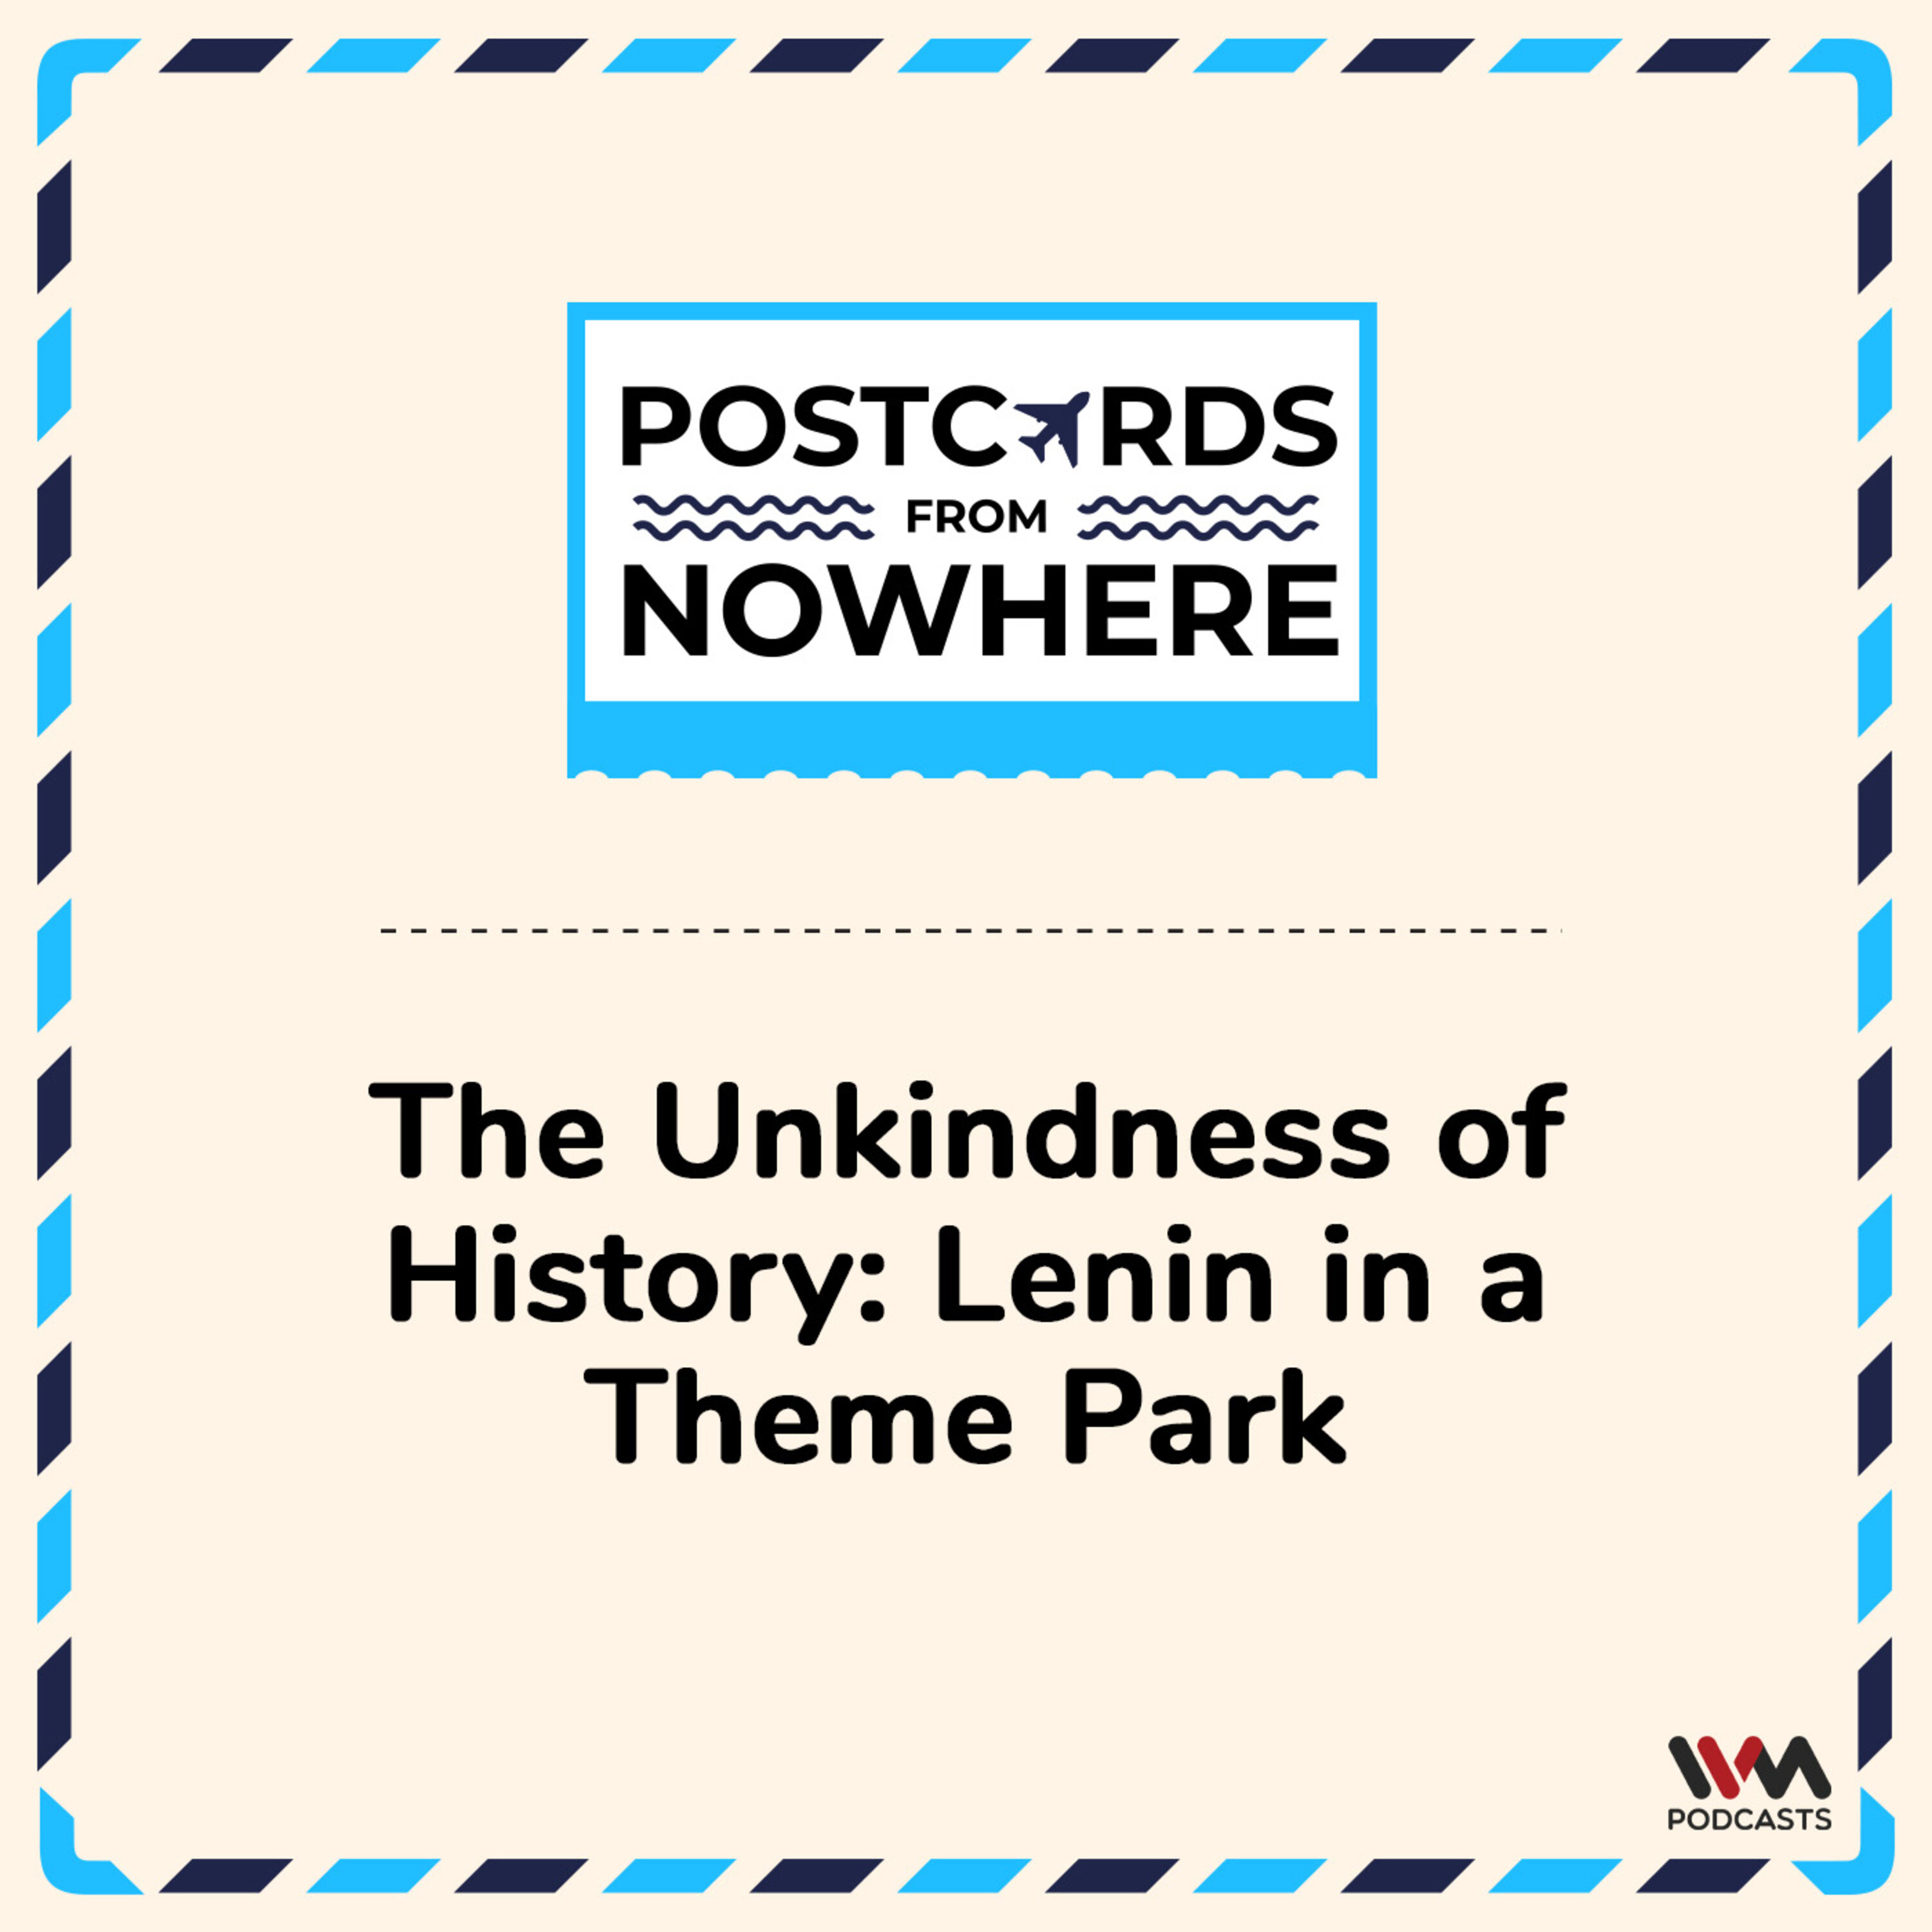 The Unkindness of History: Lenin in a Theme Park